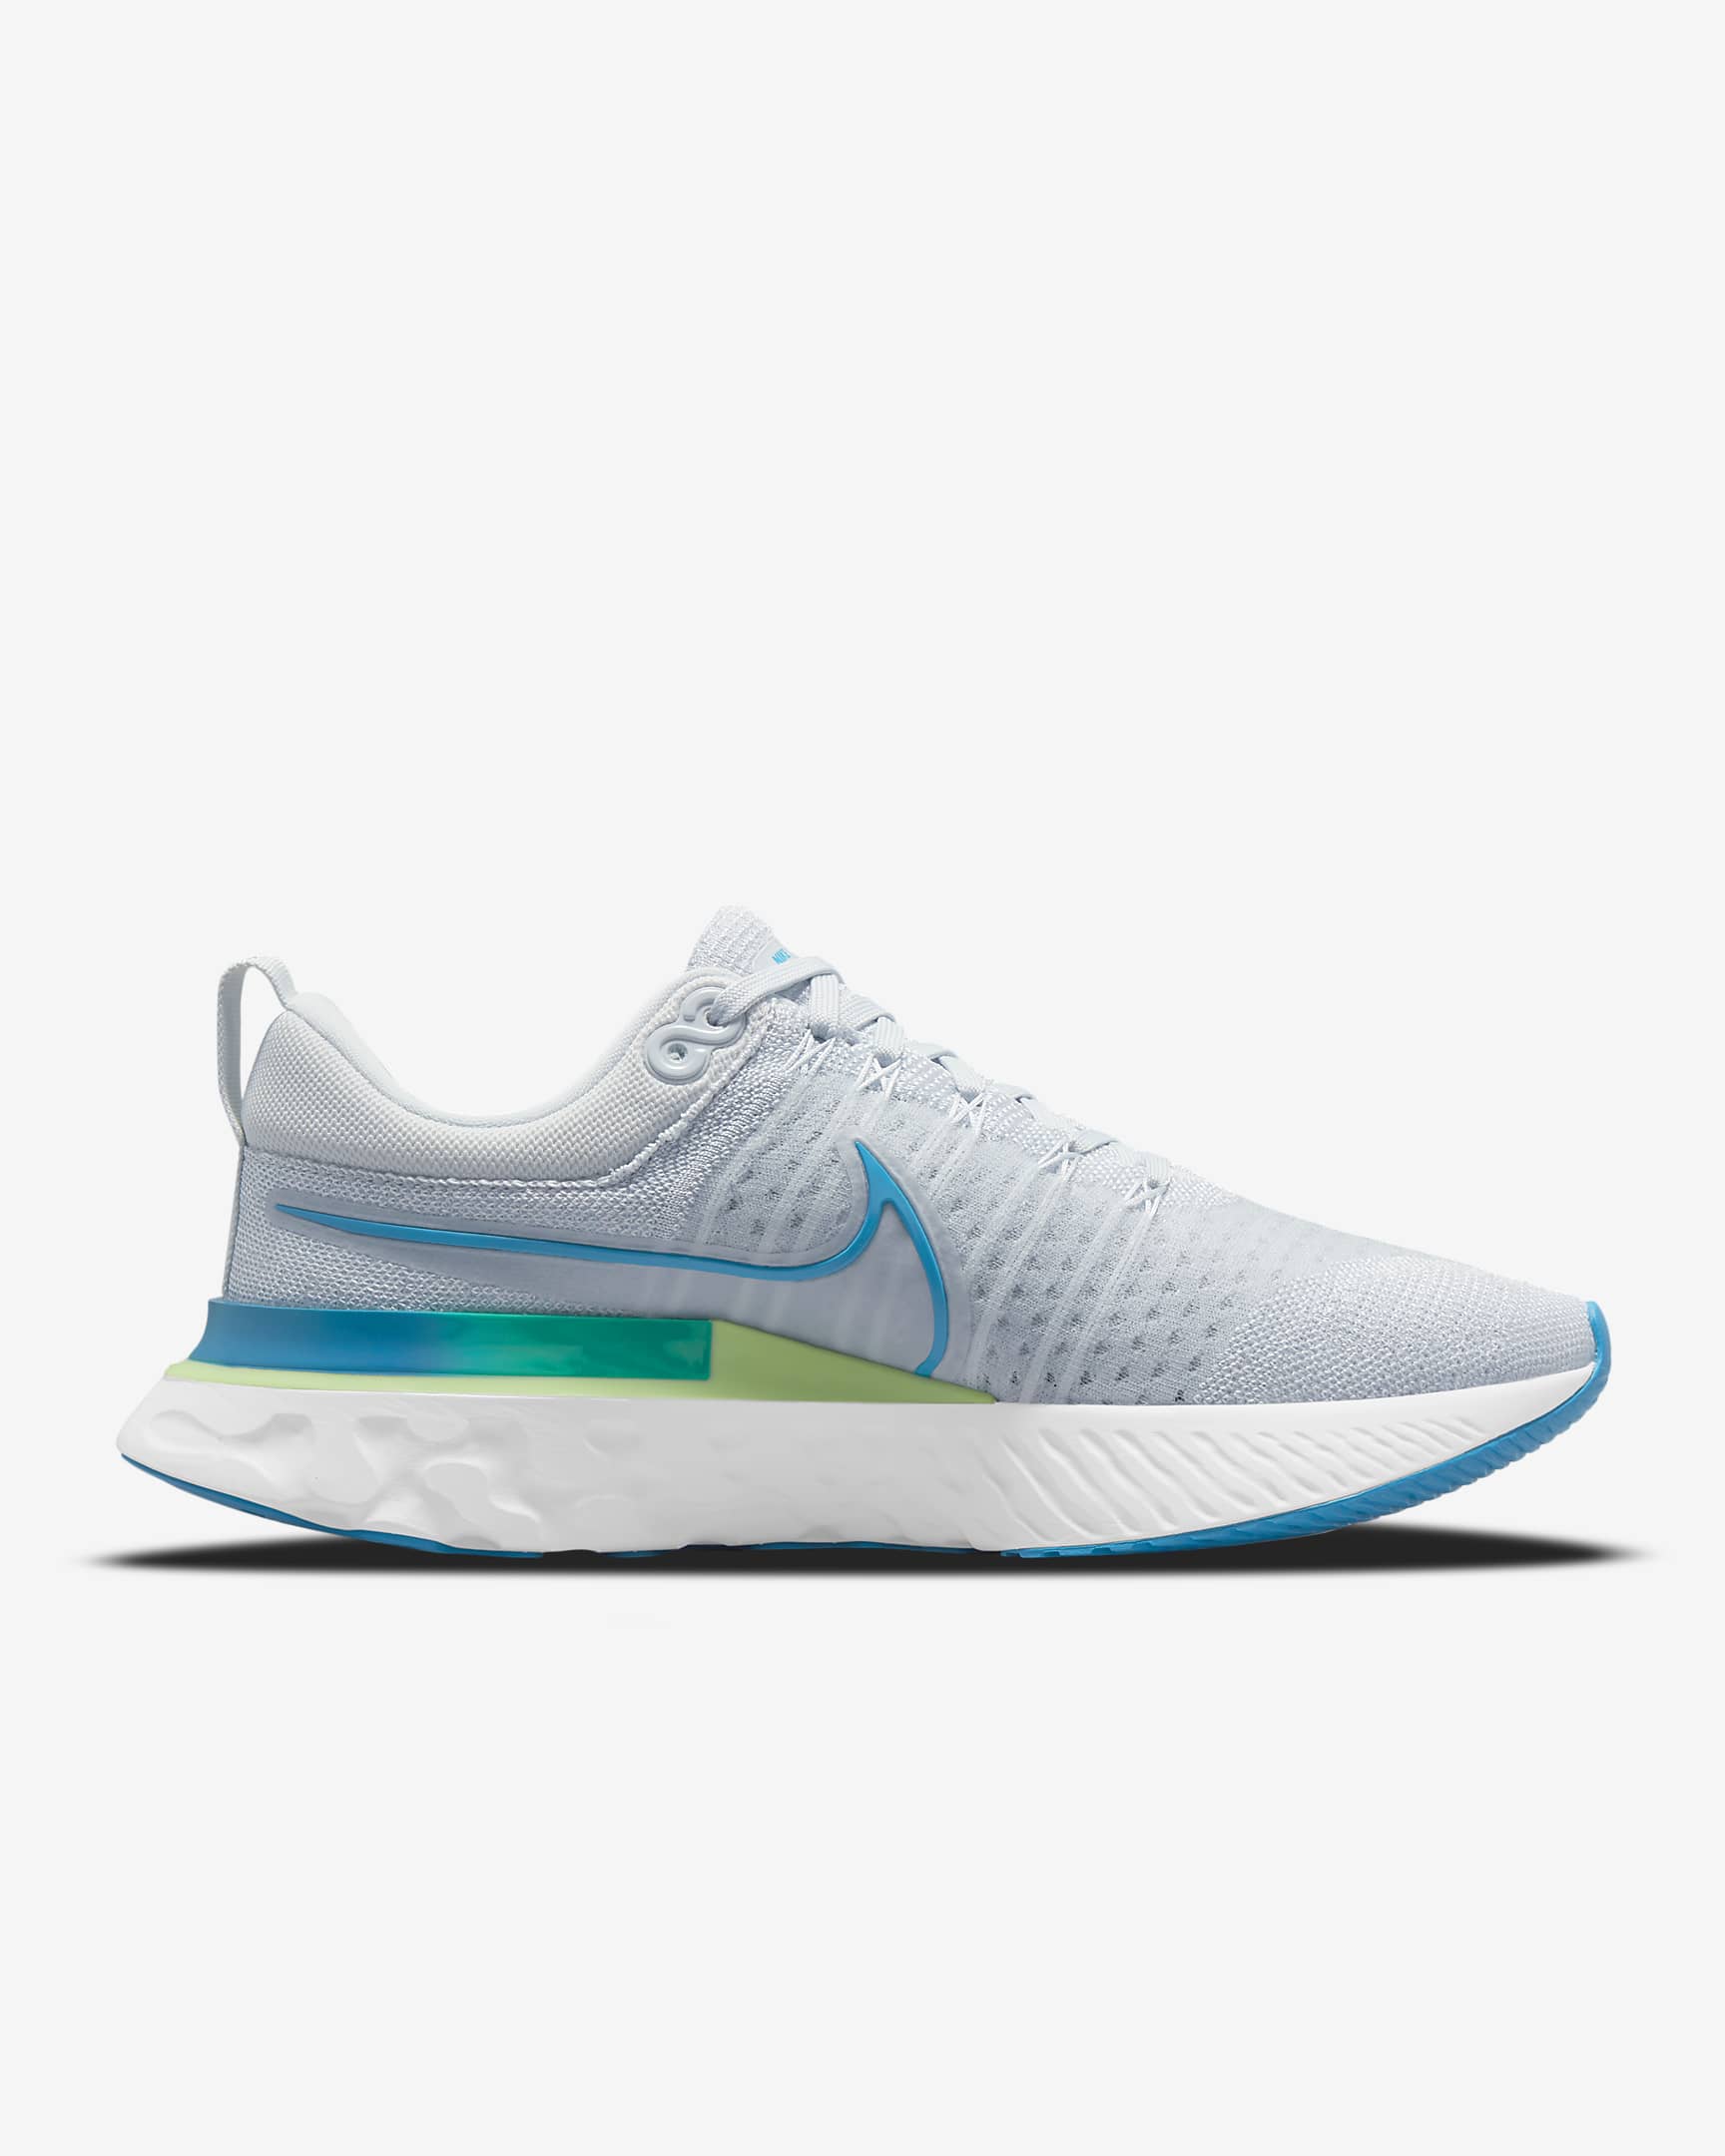 Nike React Infinity 2 Men's Road Running Shoes. Nike IL